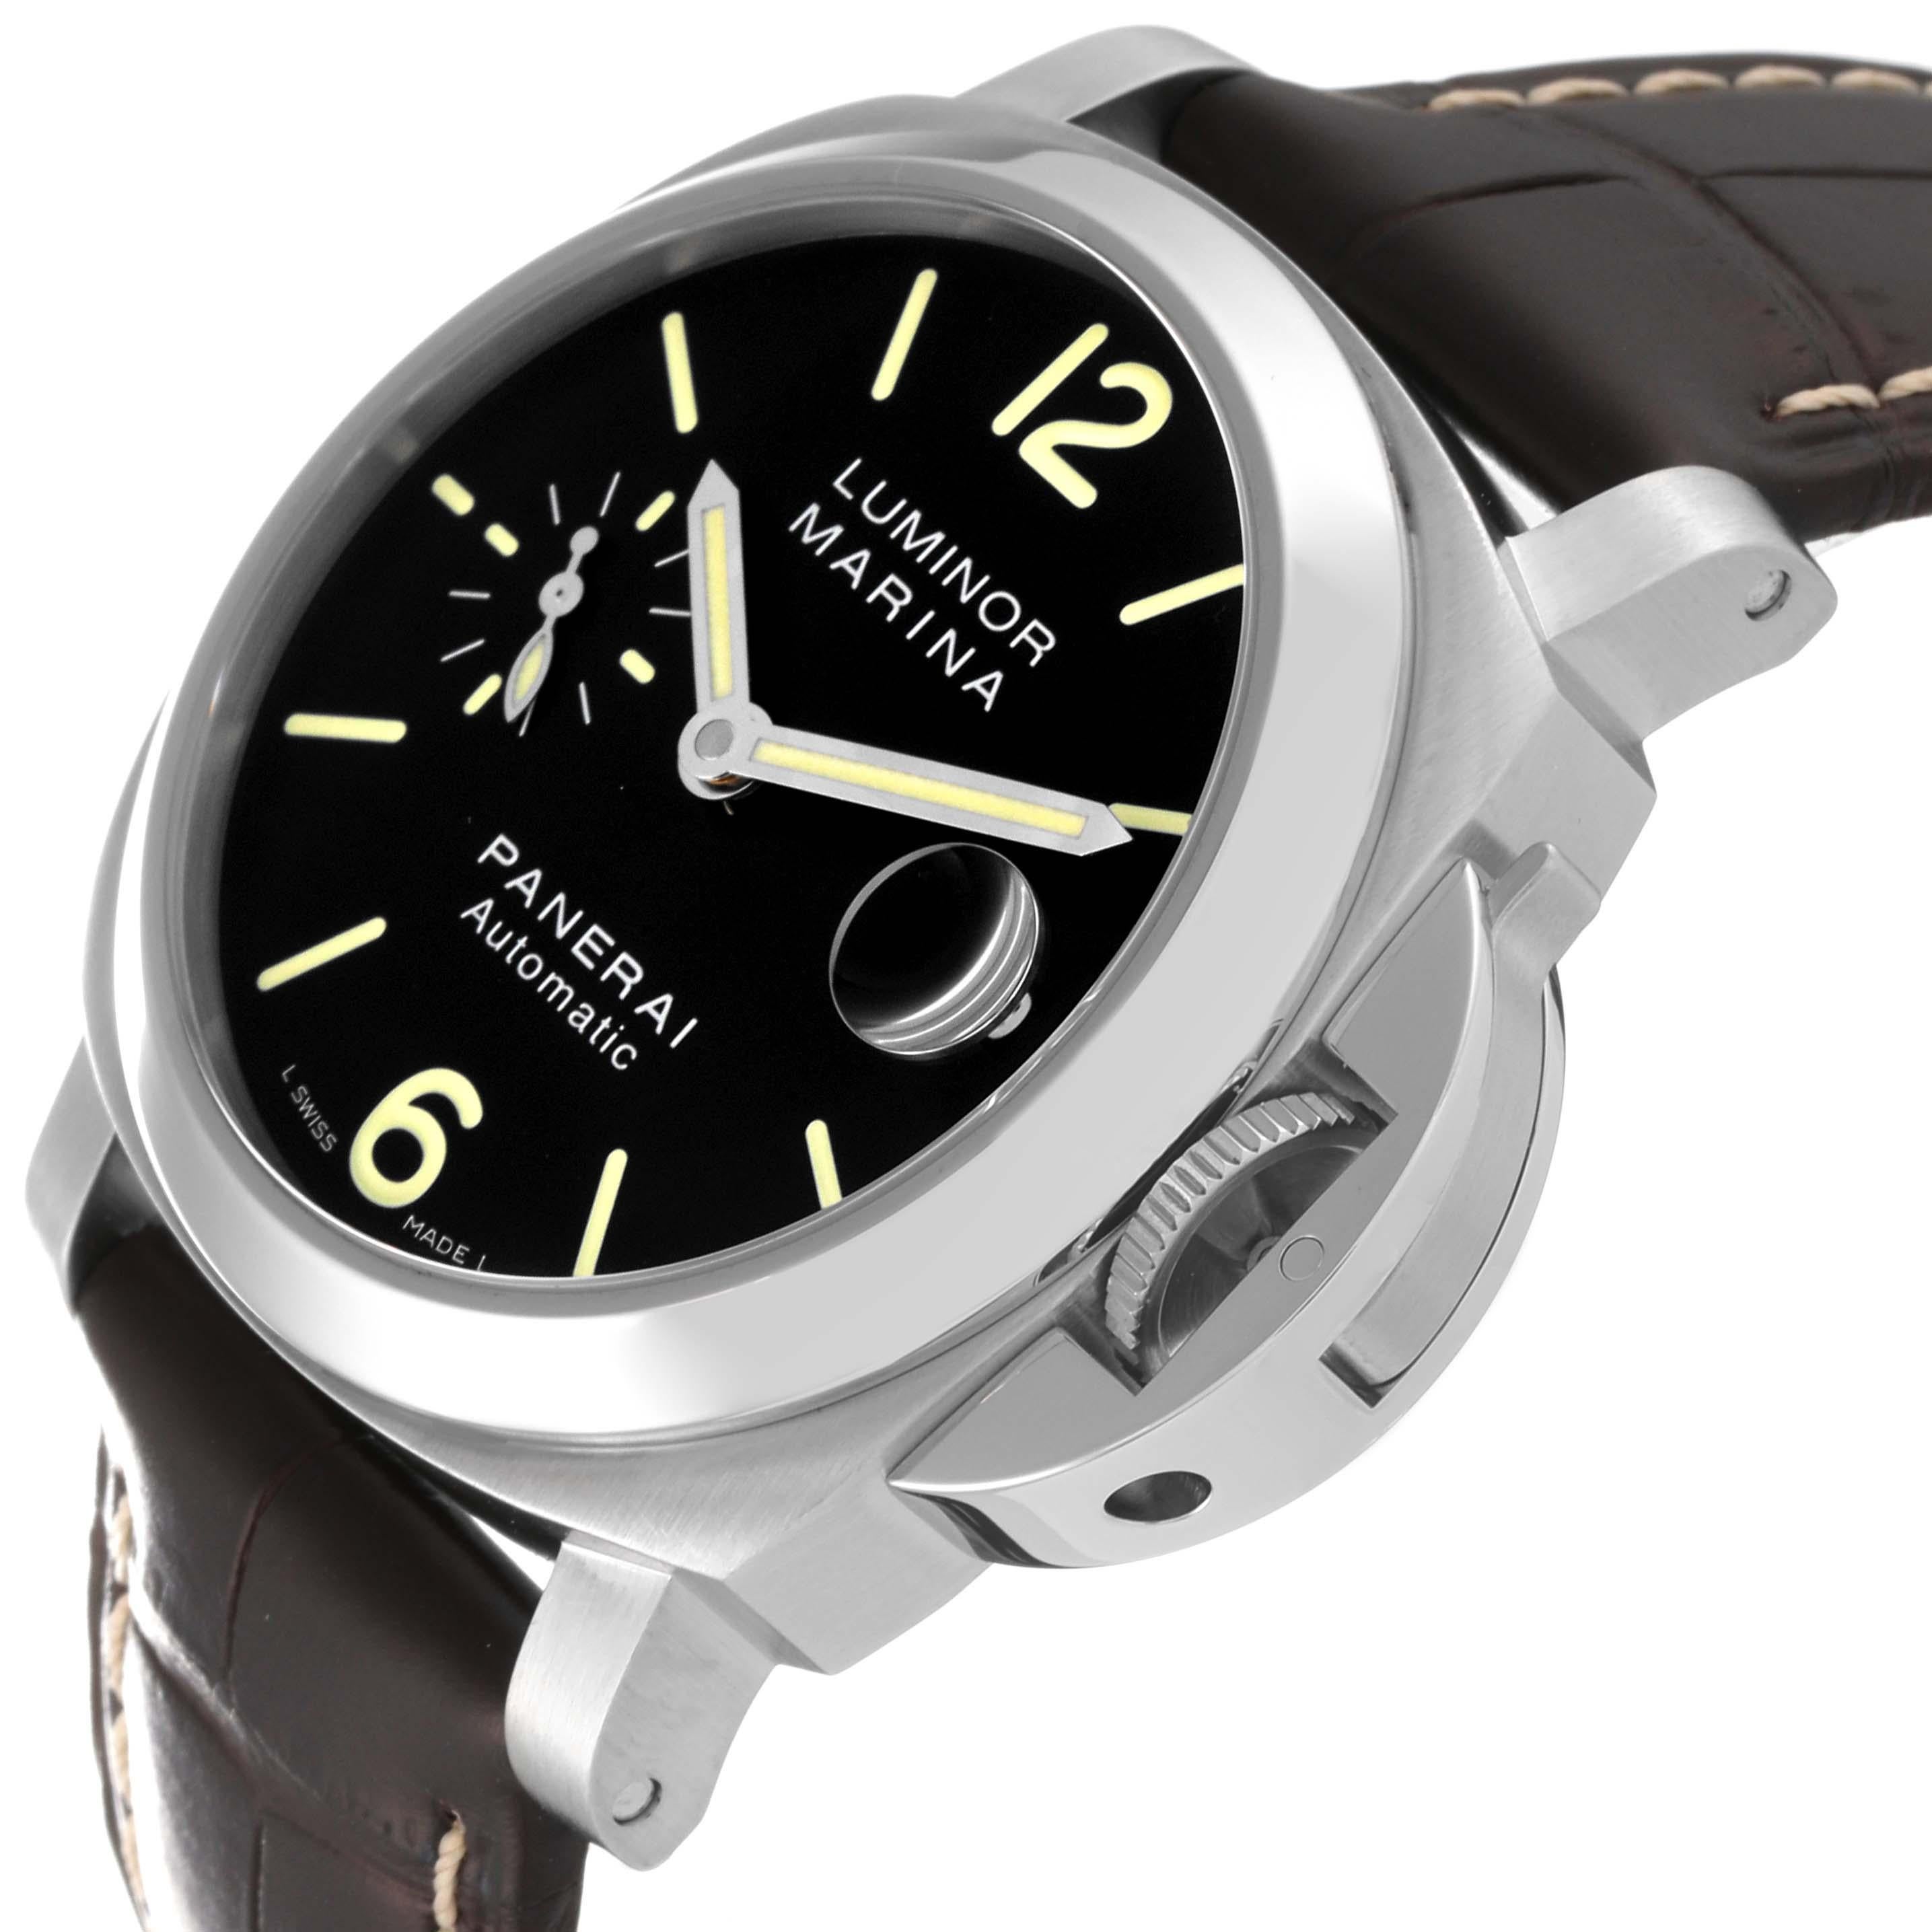 Panerai Luminor Marina Automatic Steel Mens Watch PAM00048 Papers. Automatic self-winding movement. Stainless steel cushion case 40.0 mm in diameter. Polished stainless steel Panerai patented crown protector. Polished stainless steel bezel. Scratch